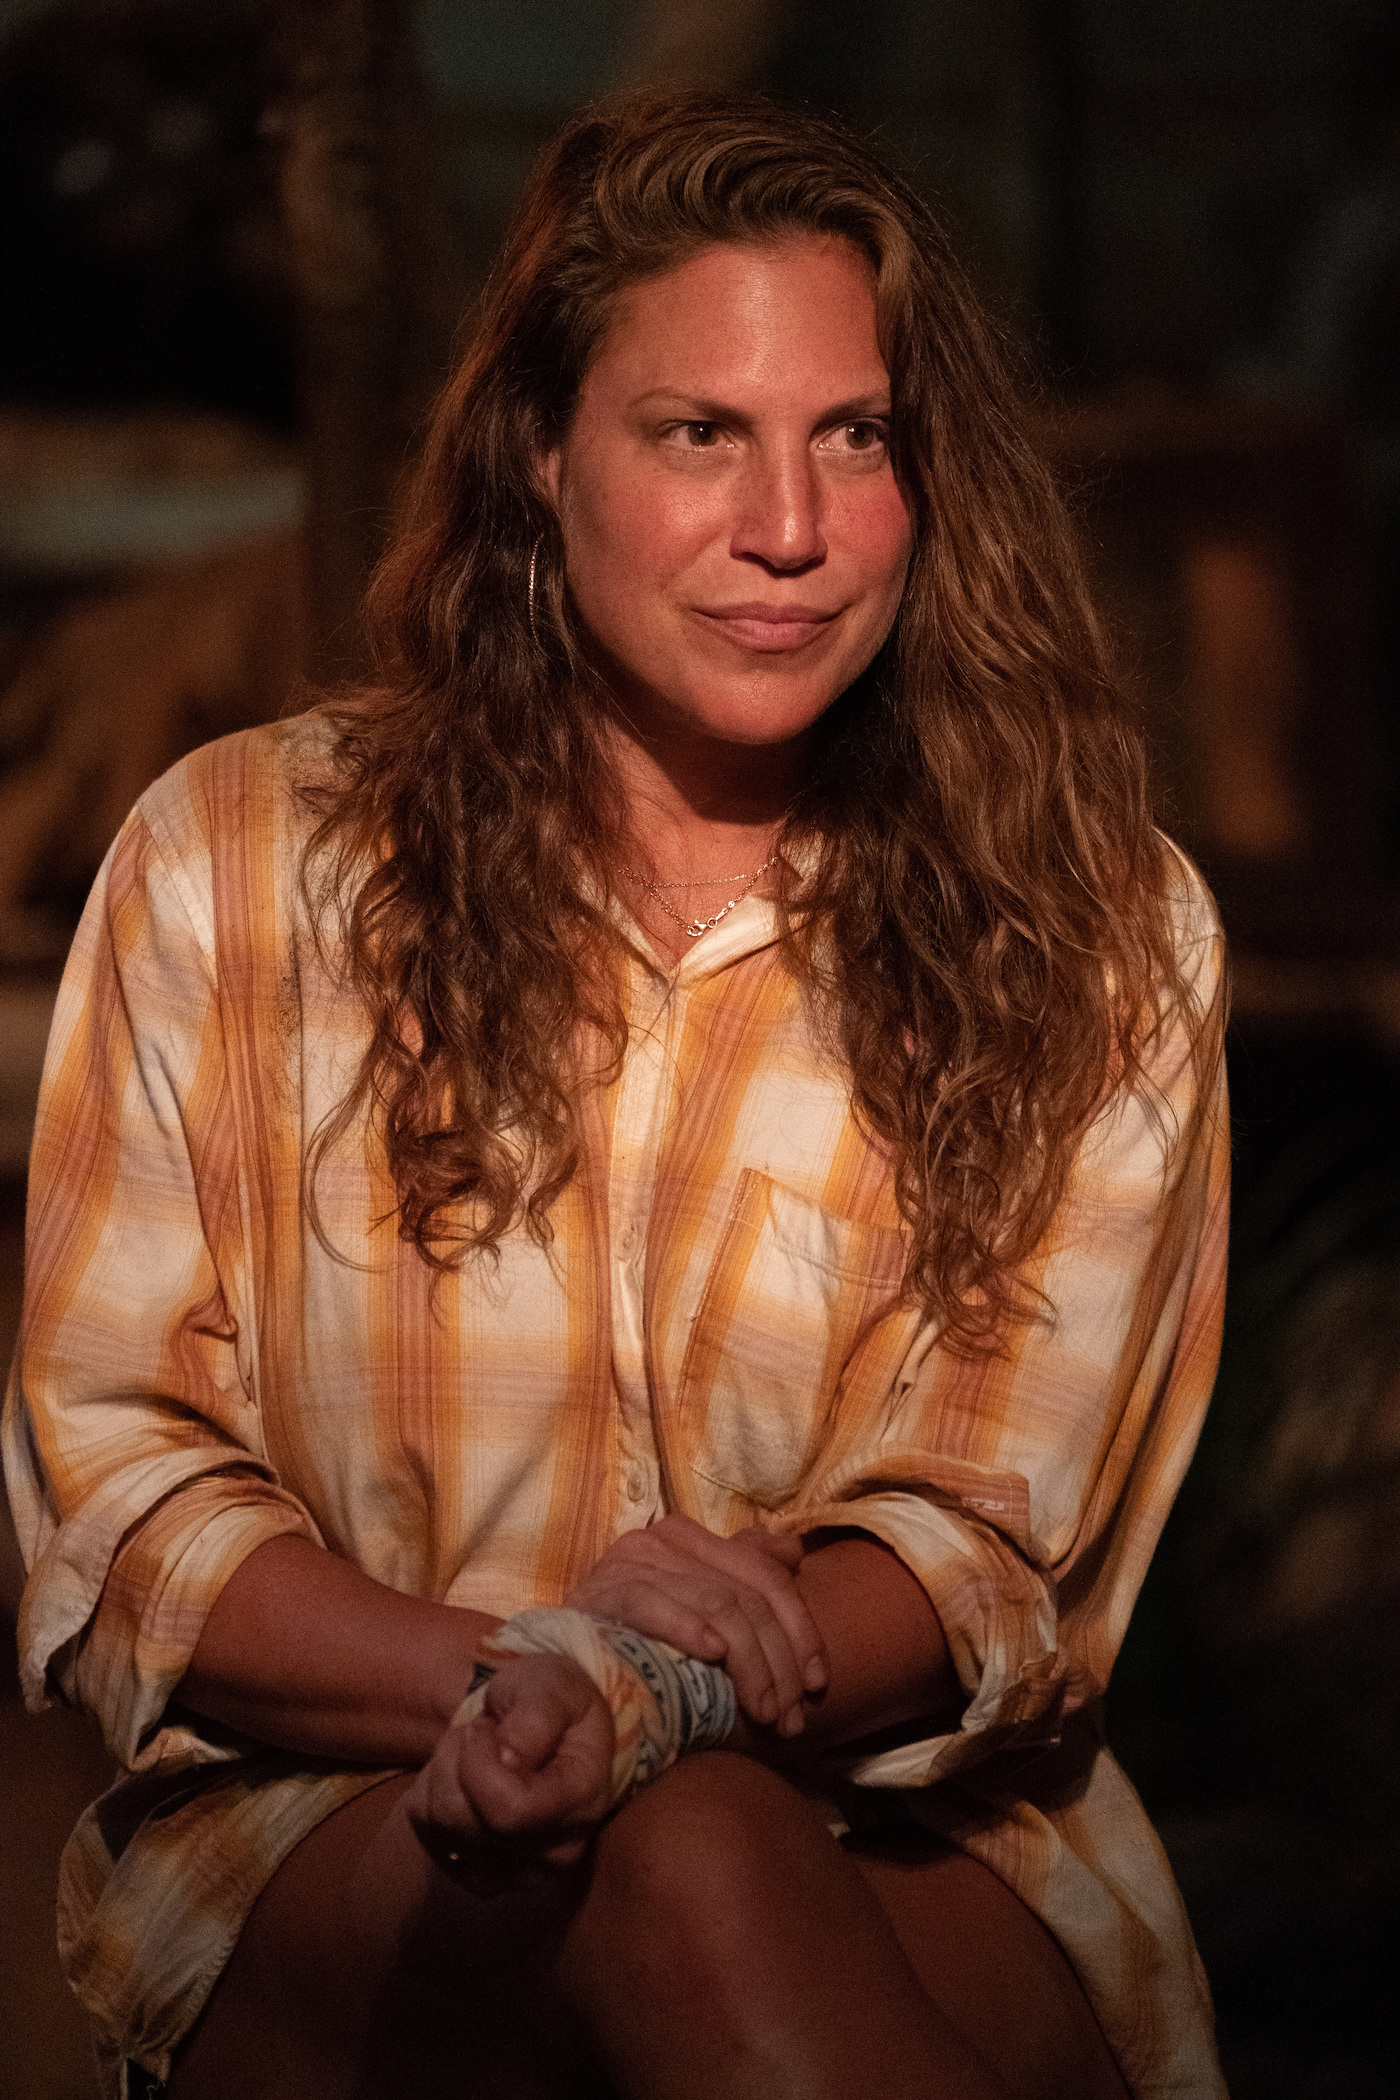 Tiffany Seely at Tribal Council on 'Survivor' Season 41. 'Survivor' Season 41 spoilers note Tiffany goes home in episode 8